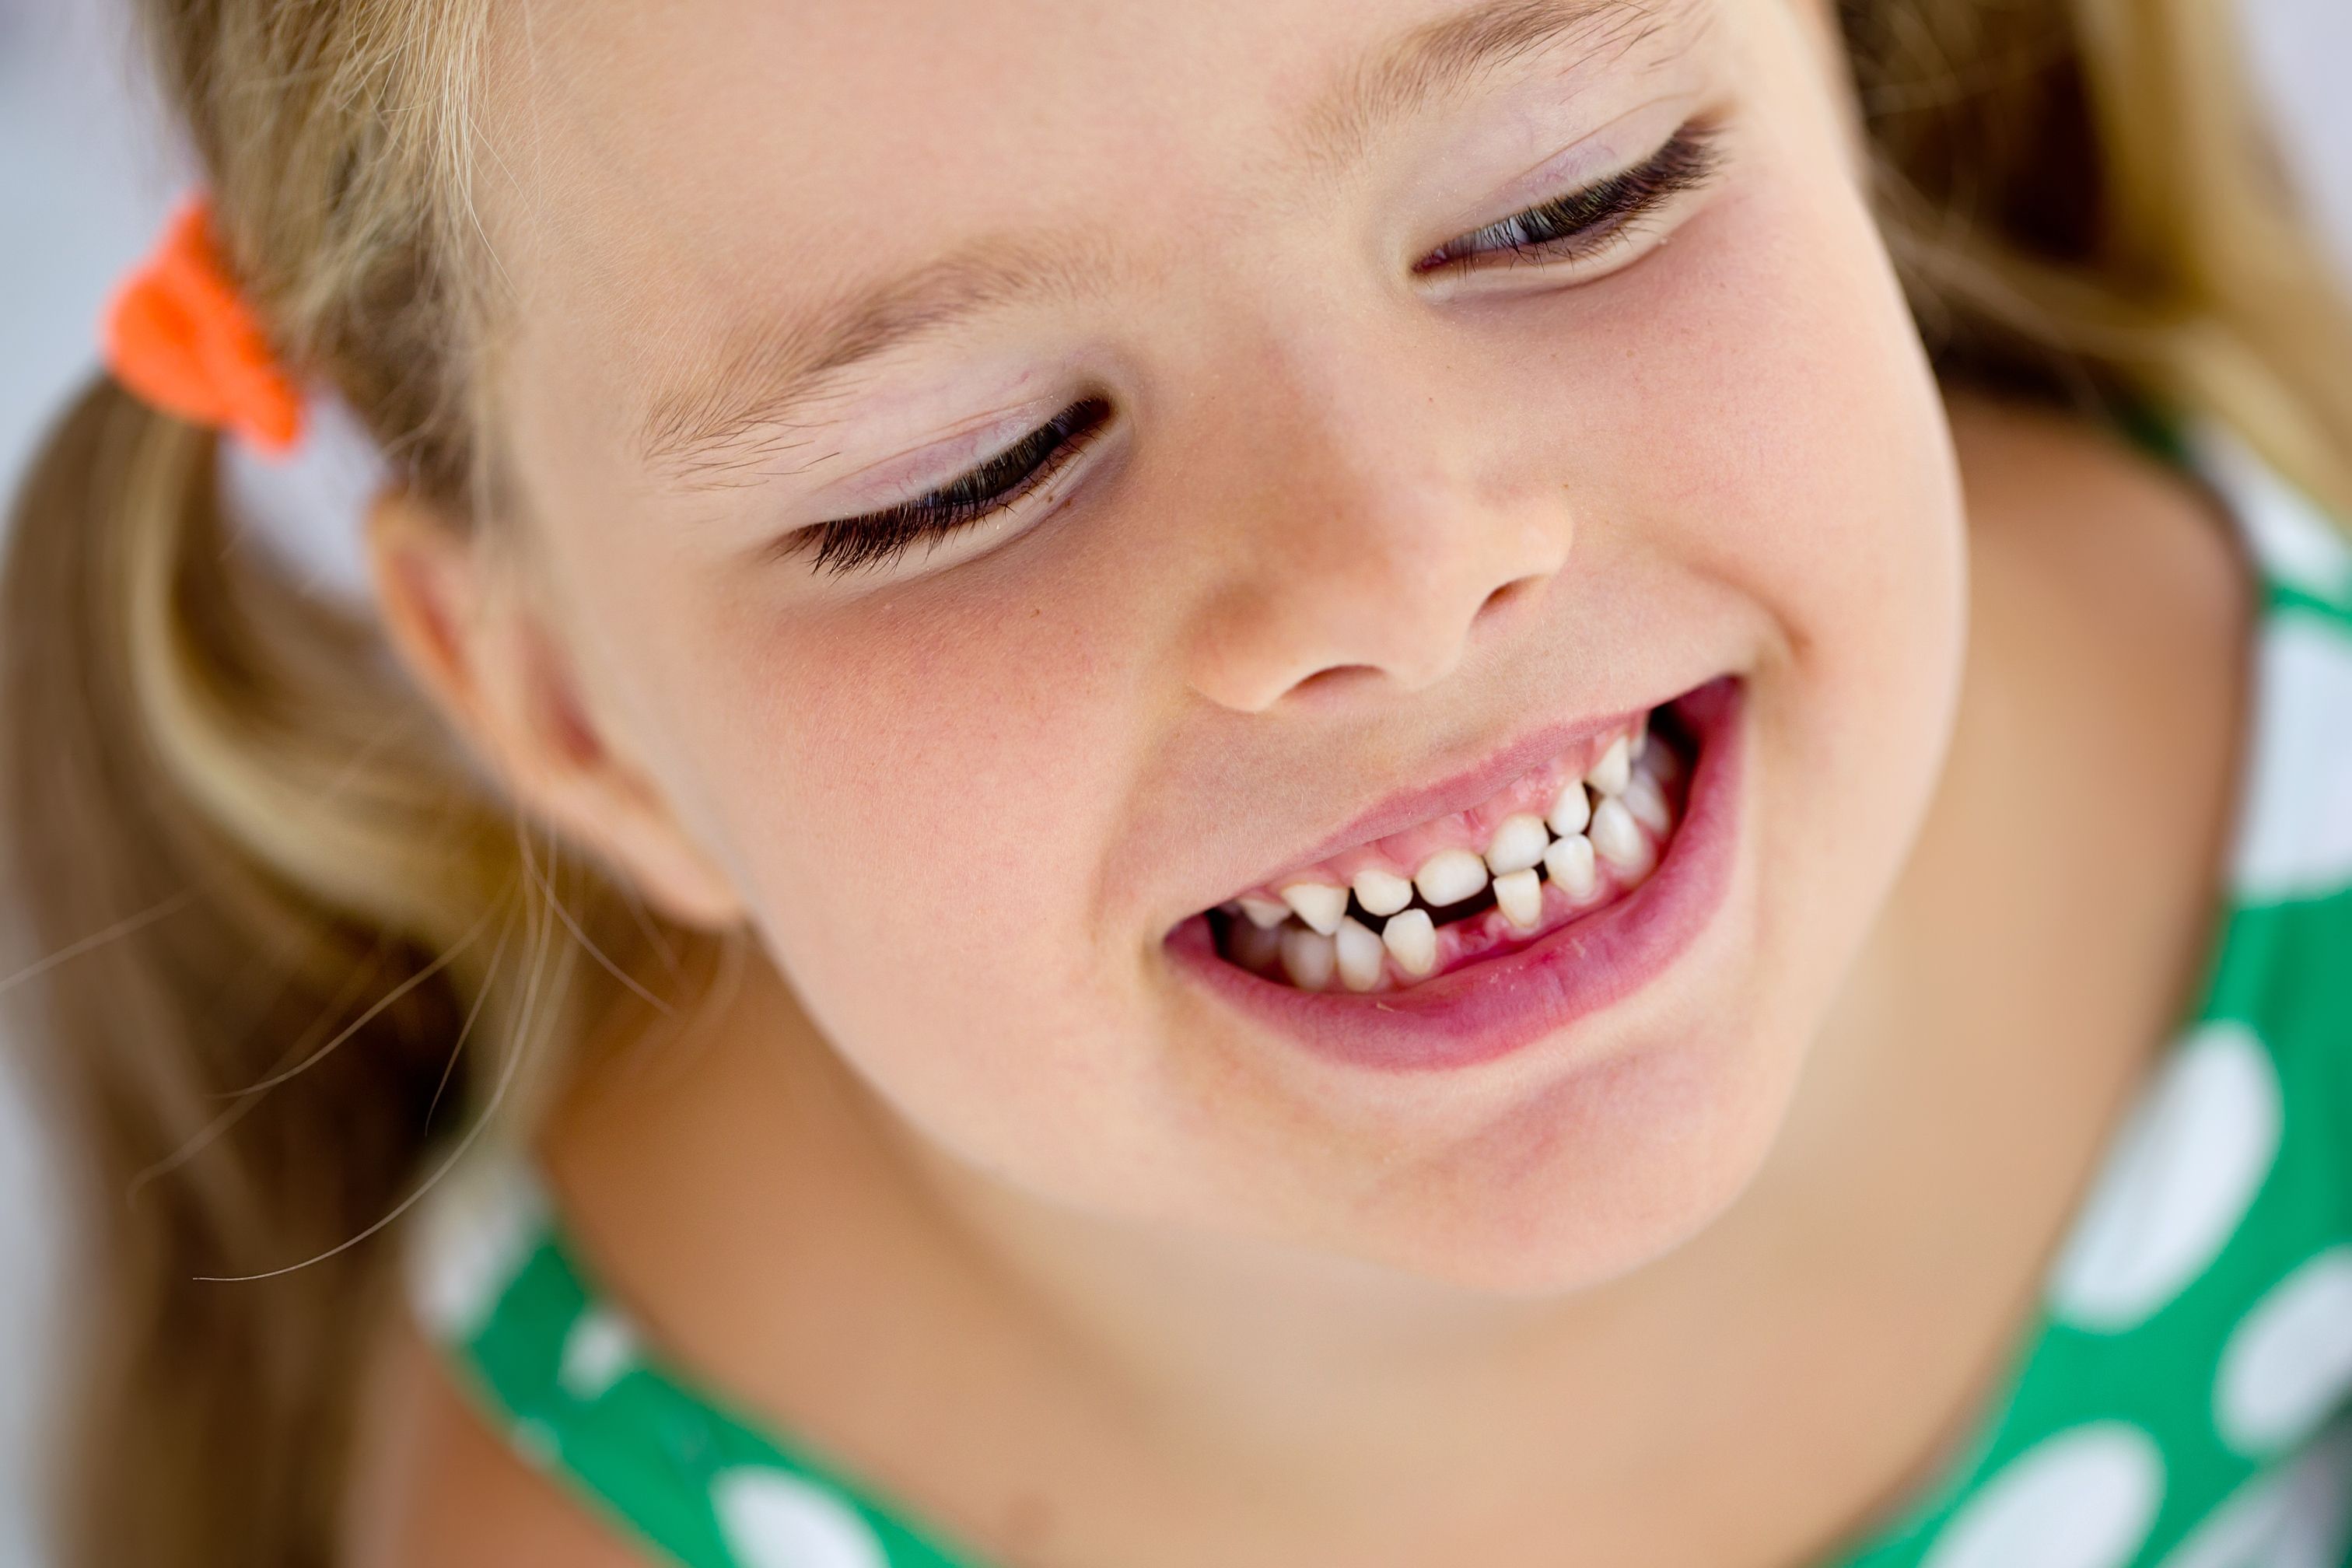 Young girl smiling with missing tooth